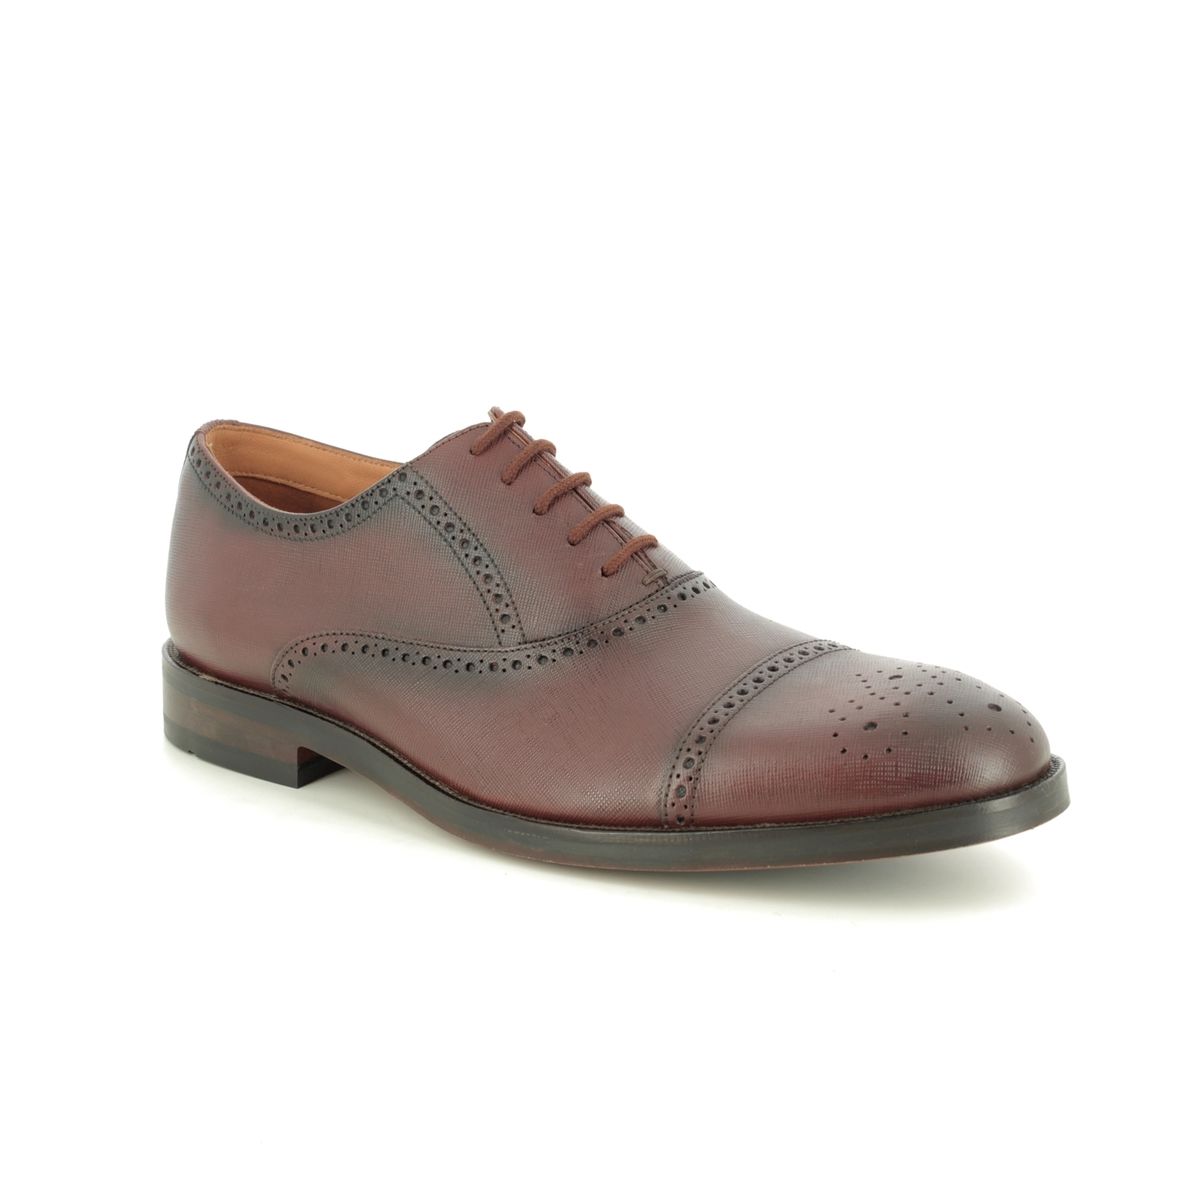 clarks shoes stockists south africa